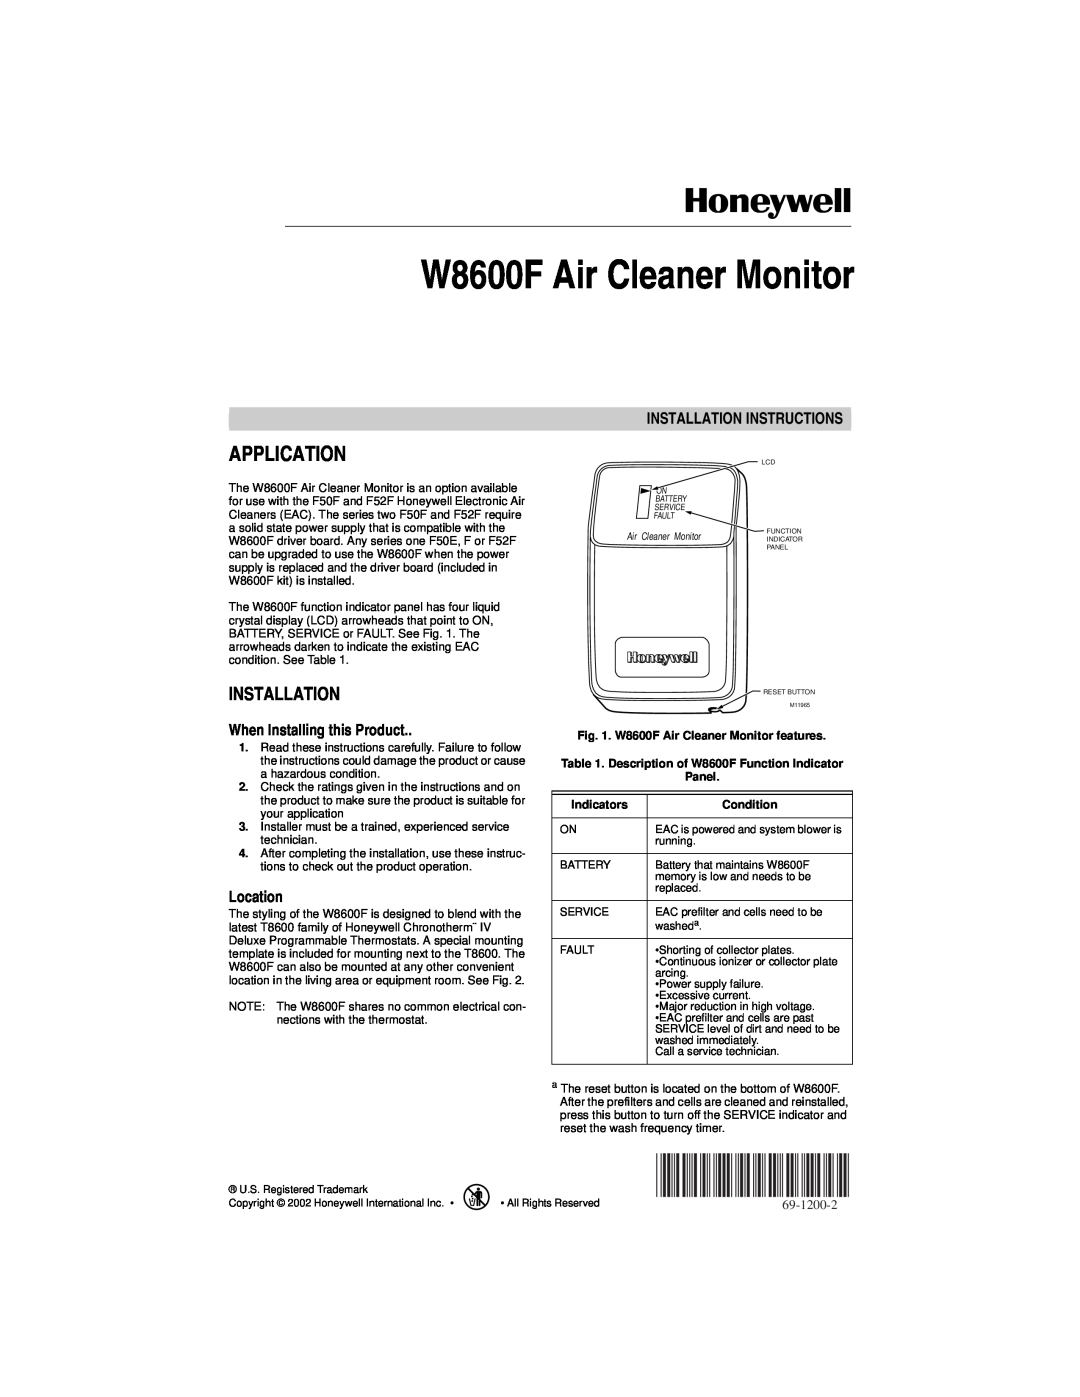 Honeywell installation instructions Application, W8600F Air Cleaner Monitor, Installation Instructions, Location 